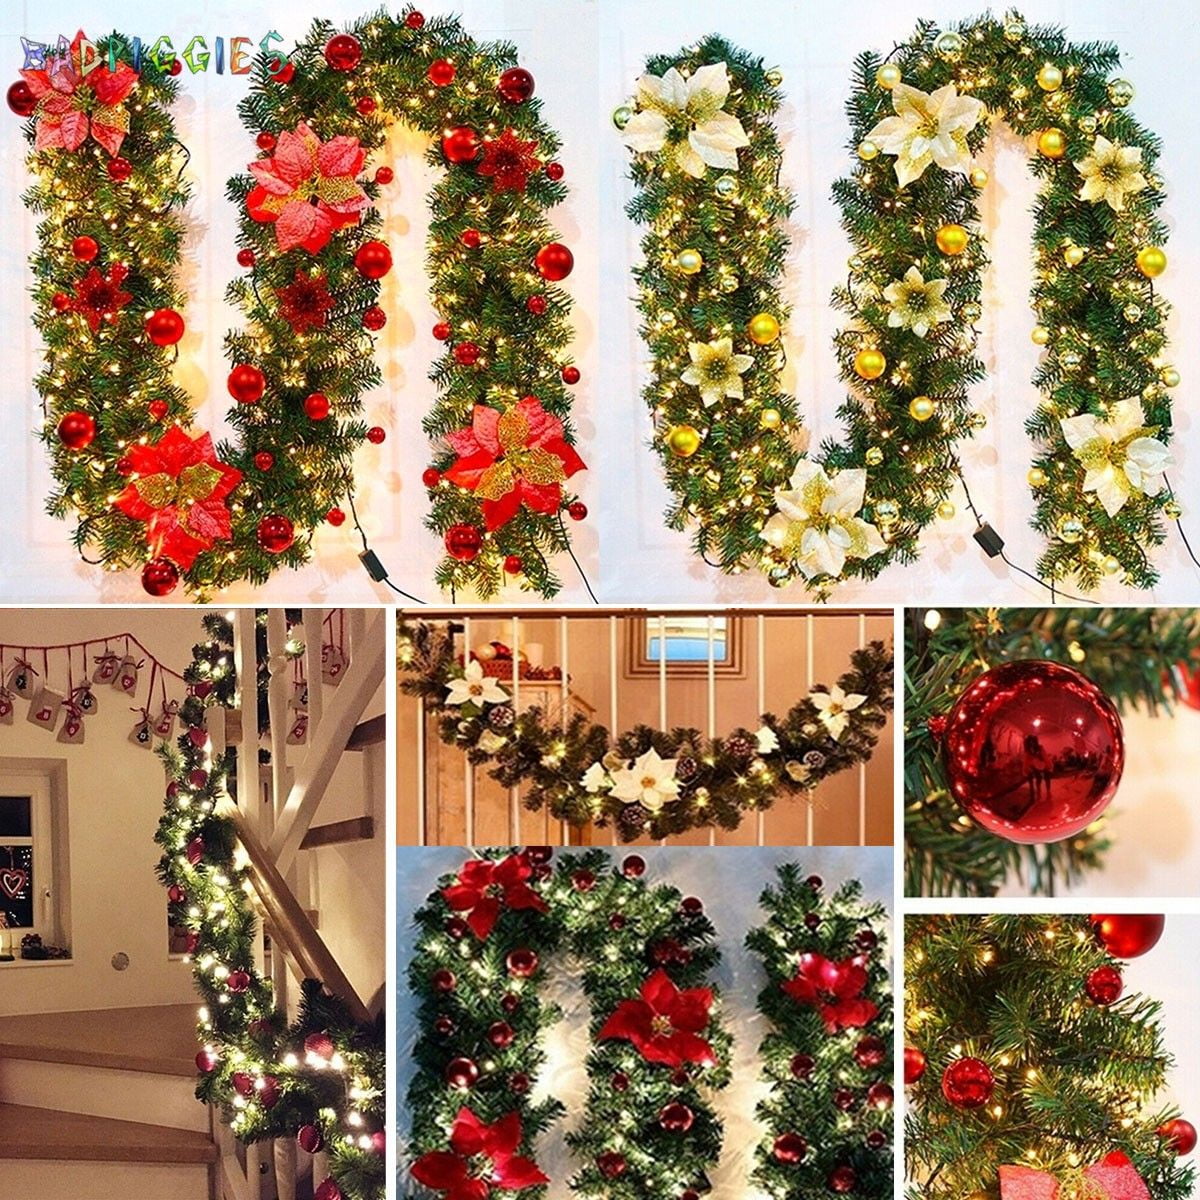 Details about   NICE ARTIFICIAL HOLLY WREATH! VERY CUTE!! 